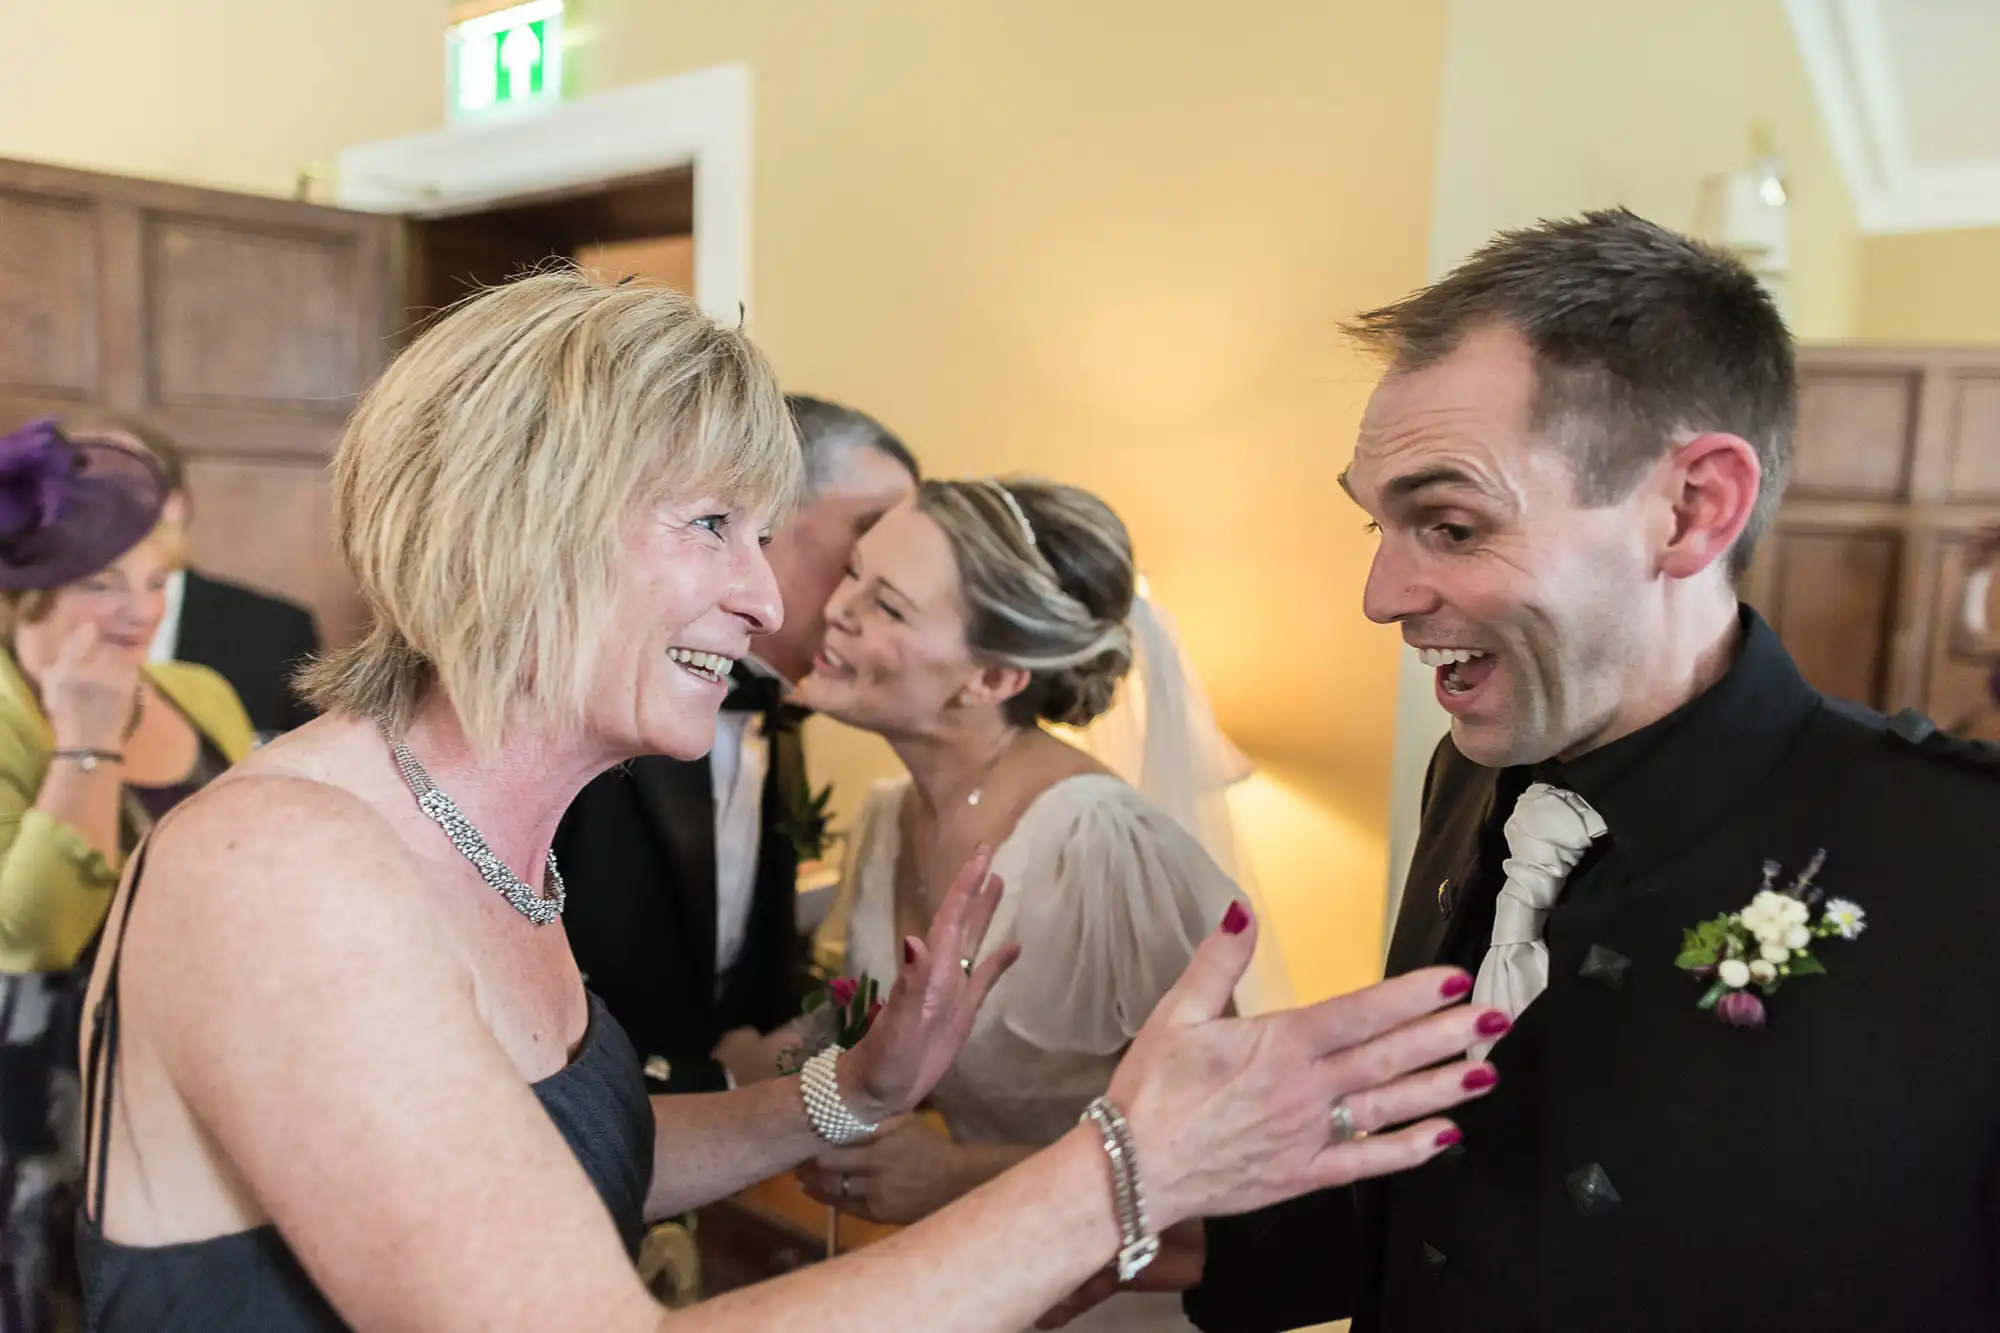 A joyful moment at a wedding reception, featuring a man in a black suit conversing animatedly with a smiling woman in a sleeveless dress.